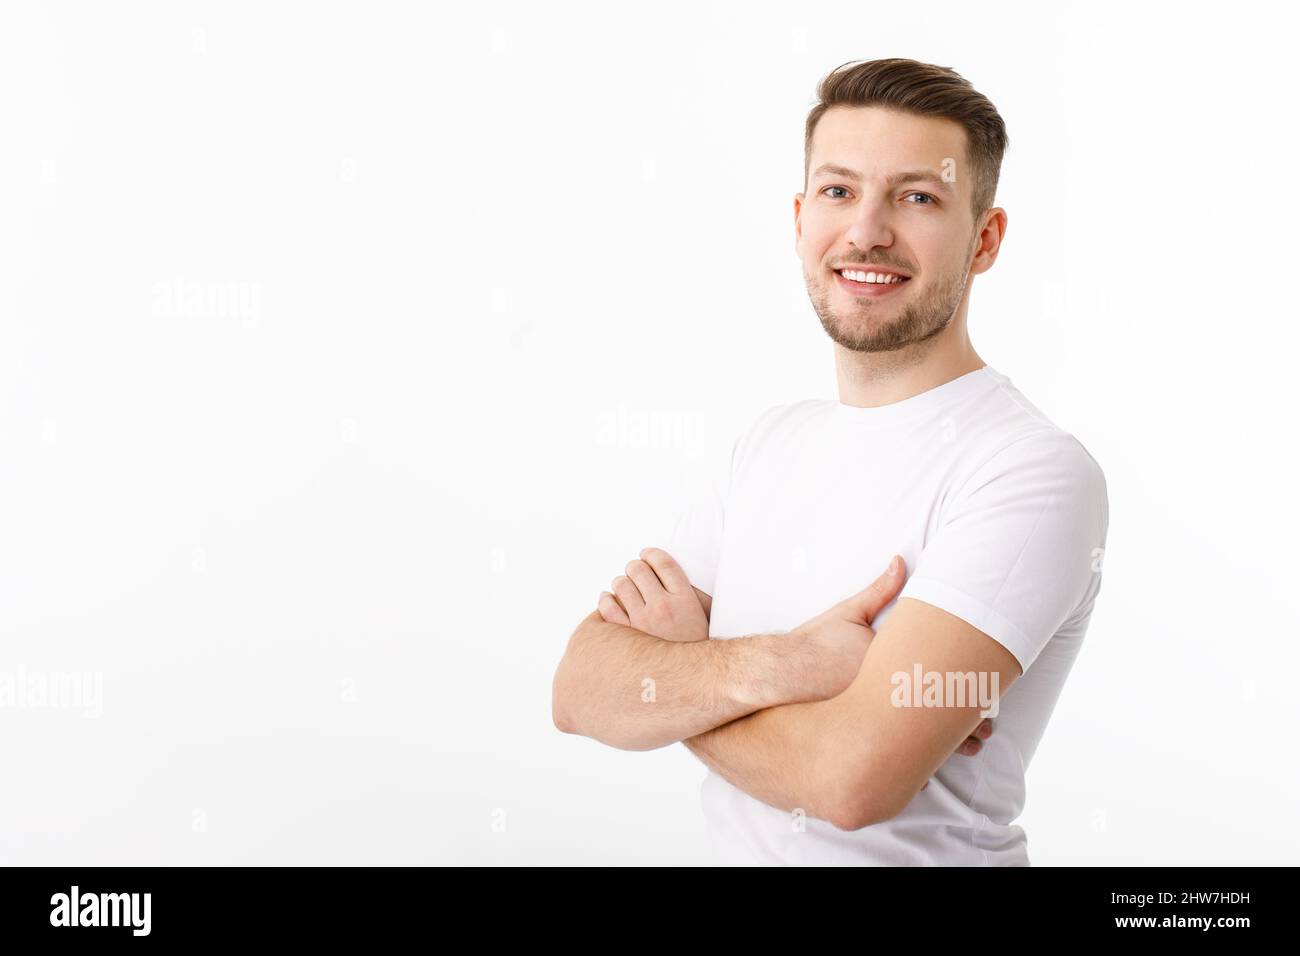 Portrait of a cheerful young man in a white T-shirt on a white background. The guy is standing looking at the camera and smiling. Stock Photo